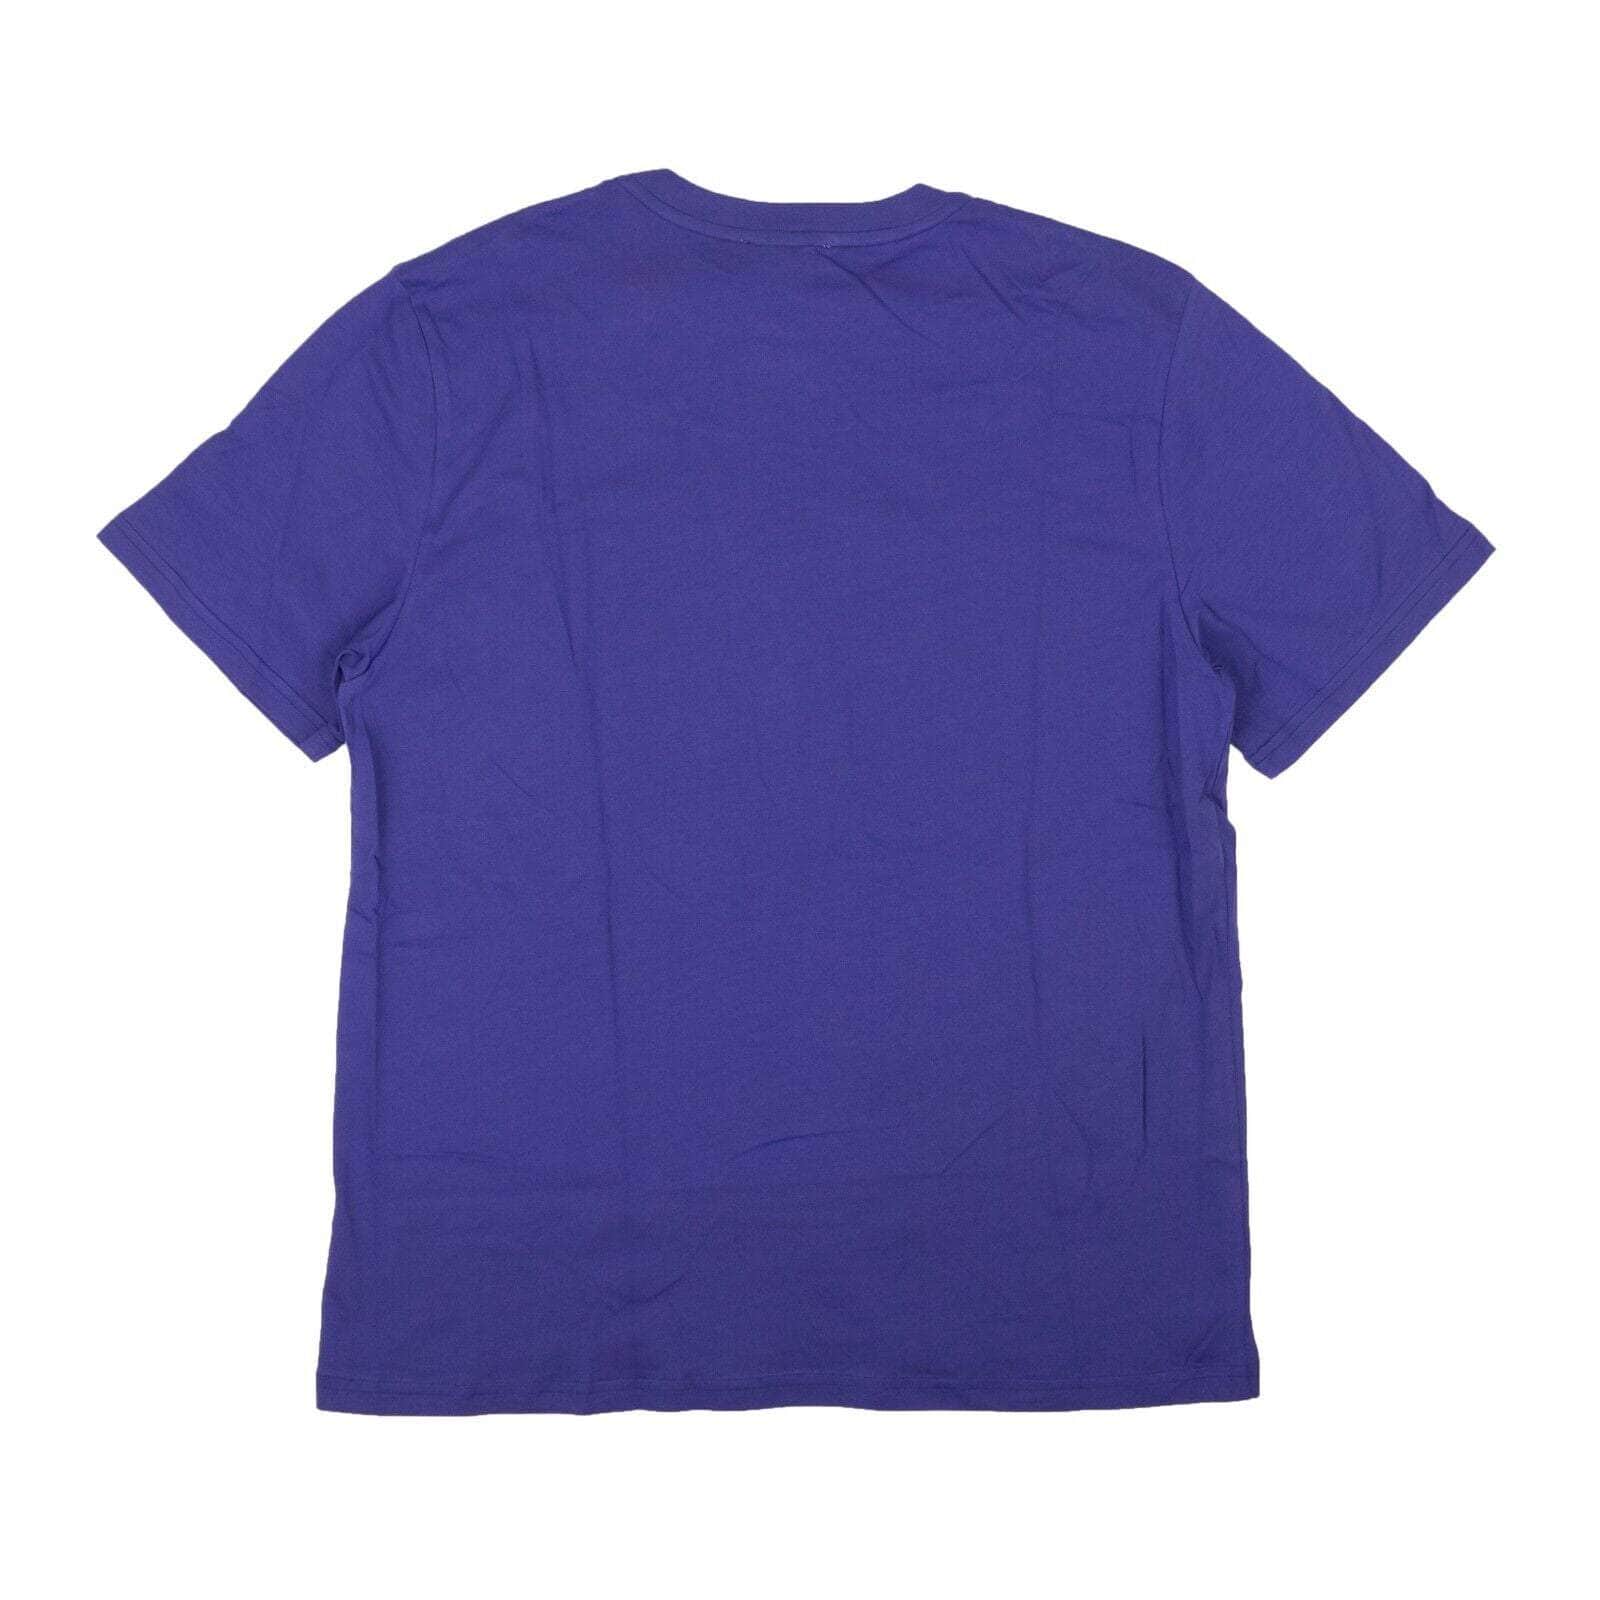 Opening Ceremony channelenable-all, chicmi, couponcollection, gender-mens, main-clothing, mens-shoes, opening-ceremony, size-l, under-250 L Violet Blank Short Sleeve T-Shirt 95-OCY-1002/L 95-OCY-1002/L